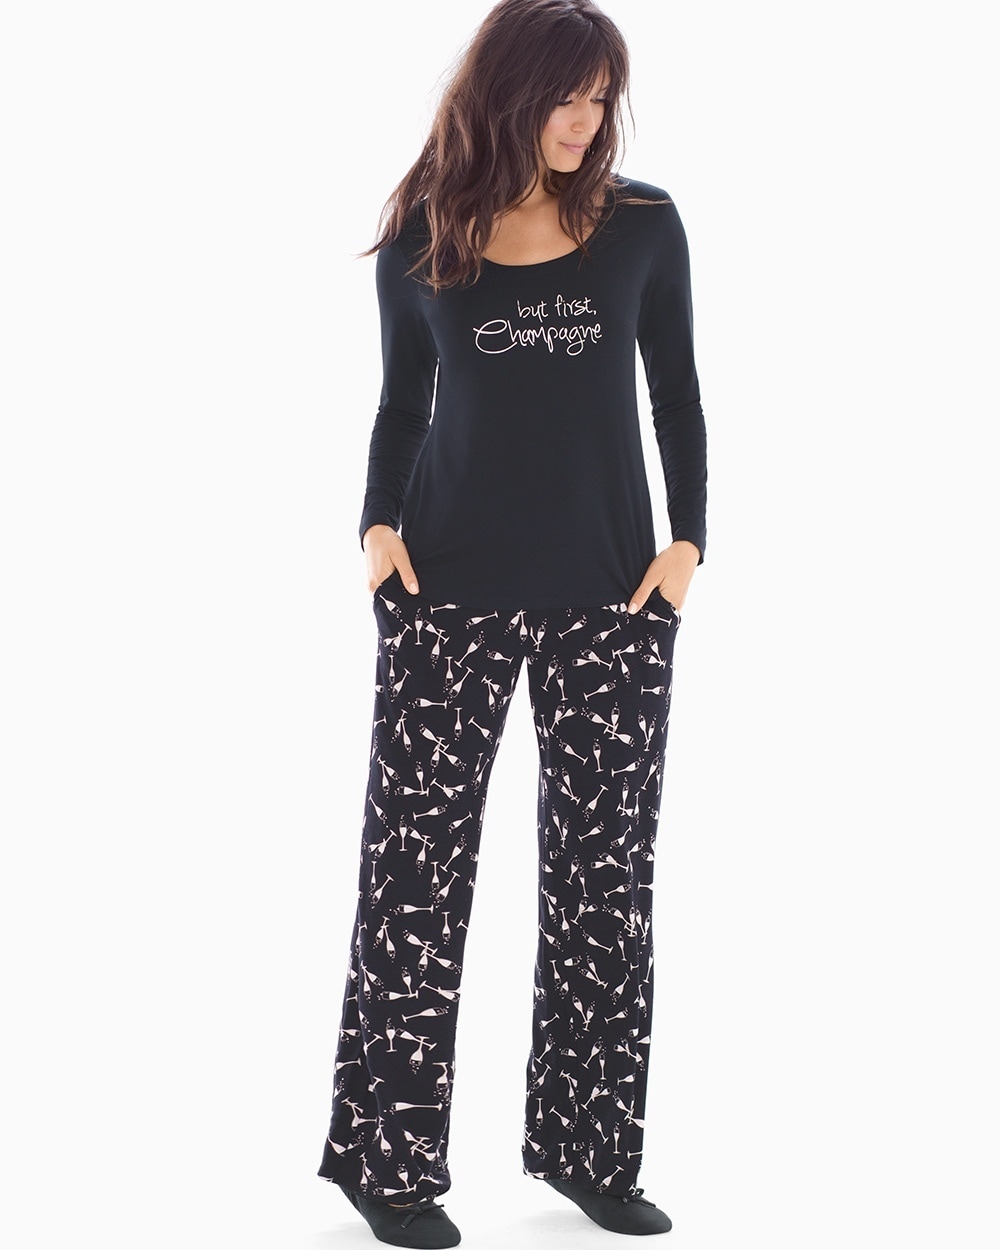 Cool Nights Scoopneck Long Sleeve Pajama Set Pass The Bubbly Black SH